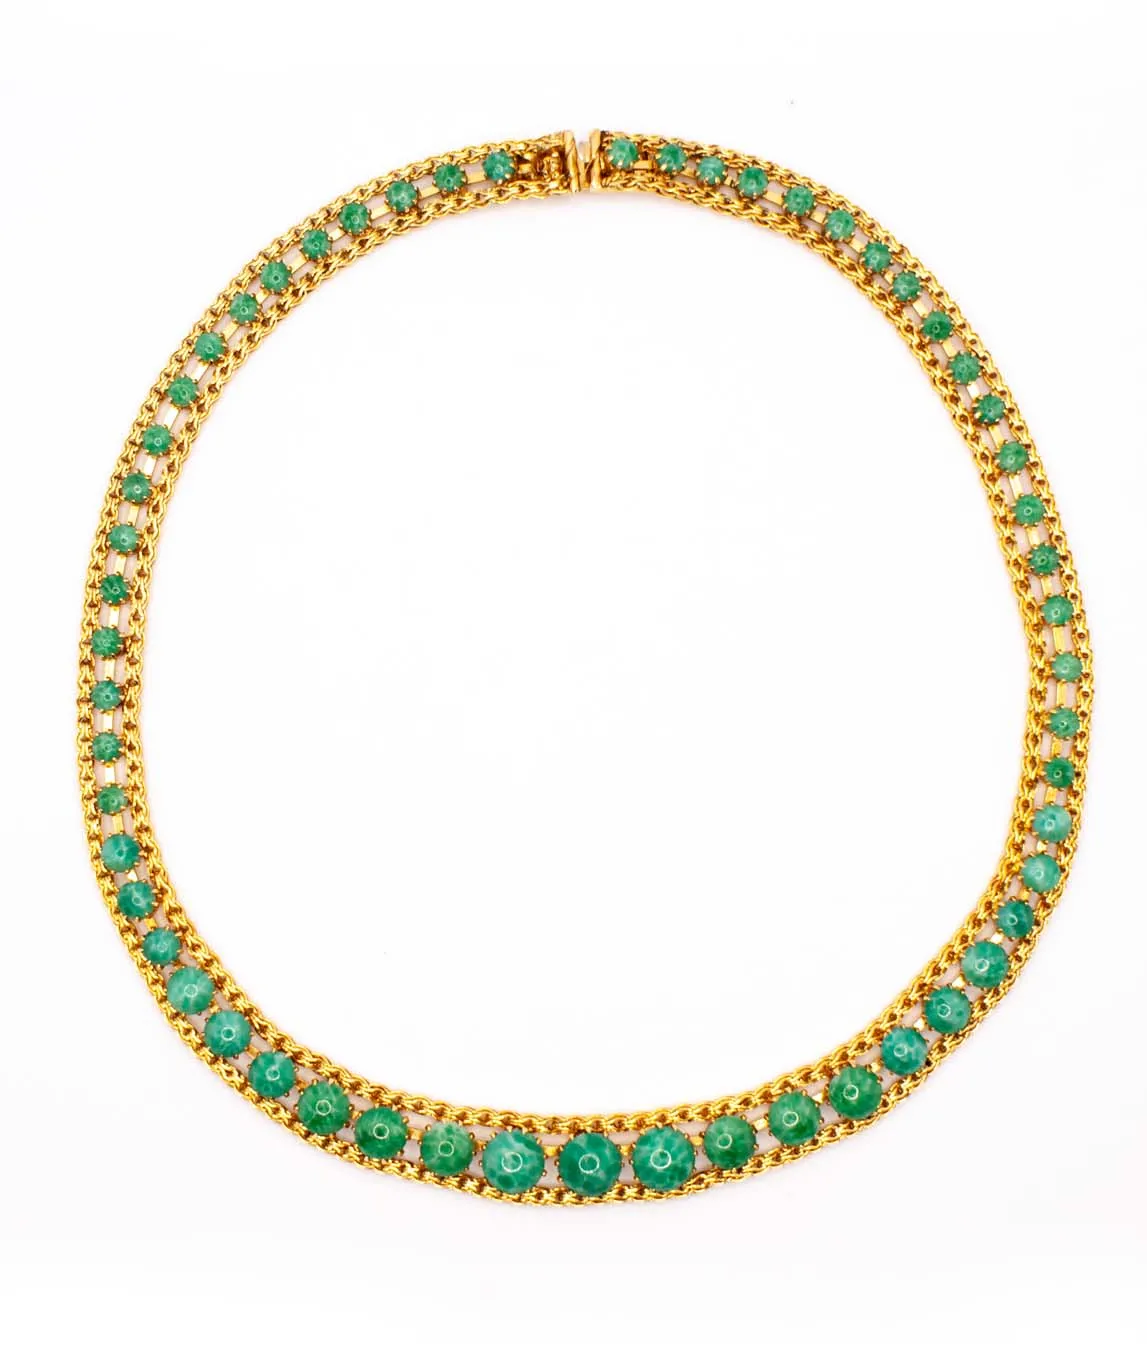 Vintage choker necklace by Christian Dior decorated with gold plated metal and round green glass stones - top view